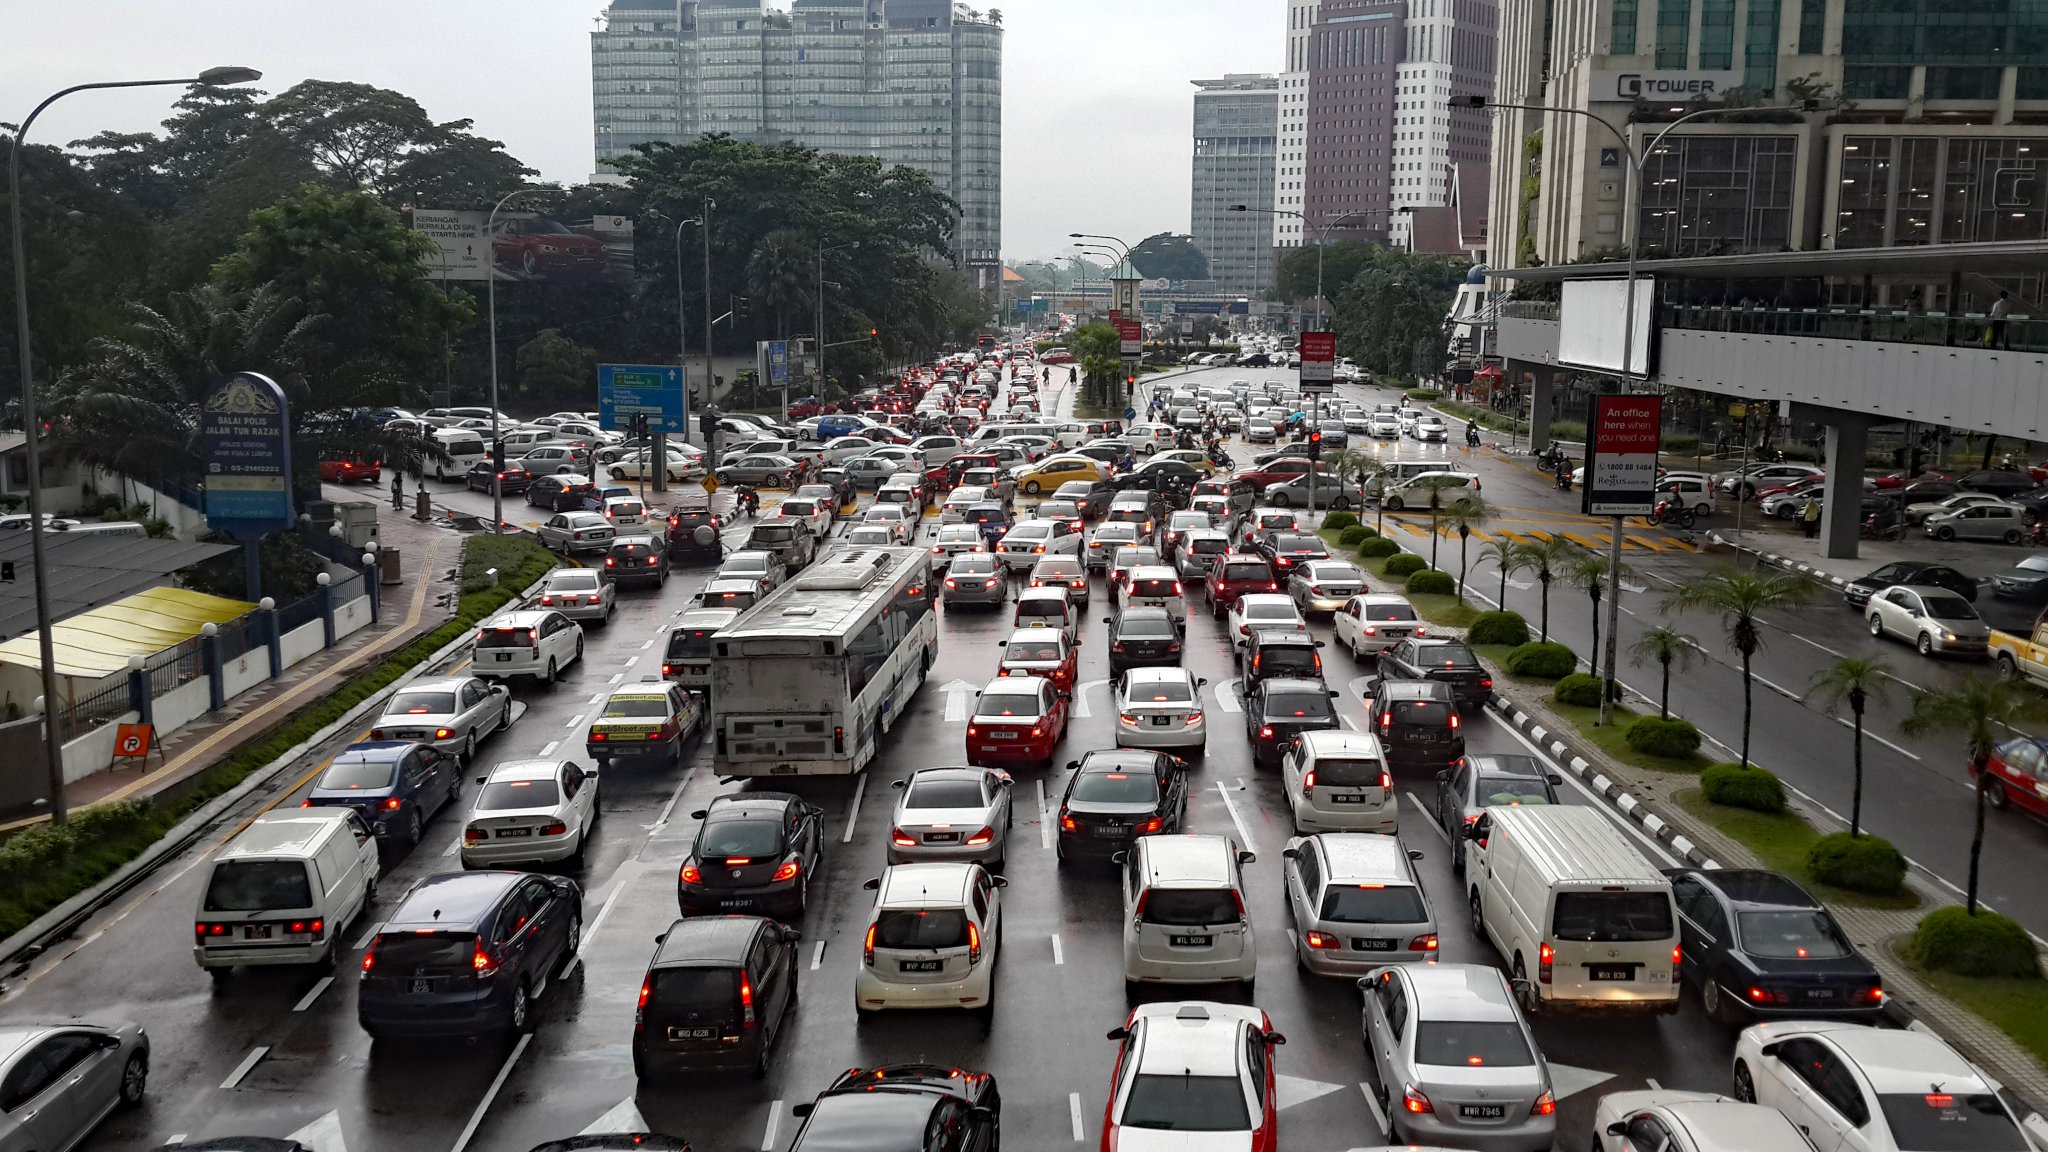 BFM News on Twitter: "1. Congestion in Kuala Lumpur improved last year due  to the pandemic, with the city ranking 210th on the annual TomTom Traffic  Index. According to a report by